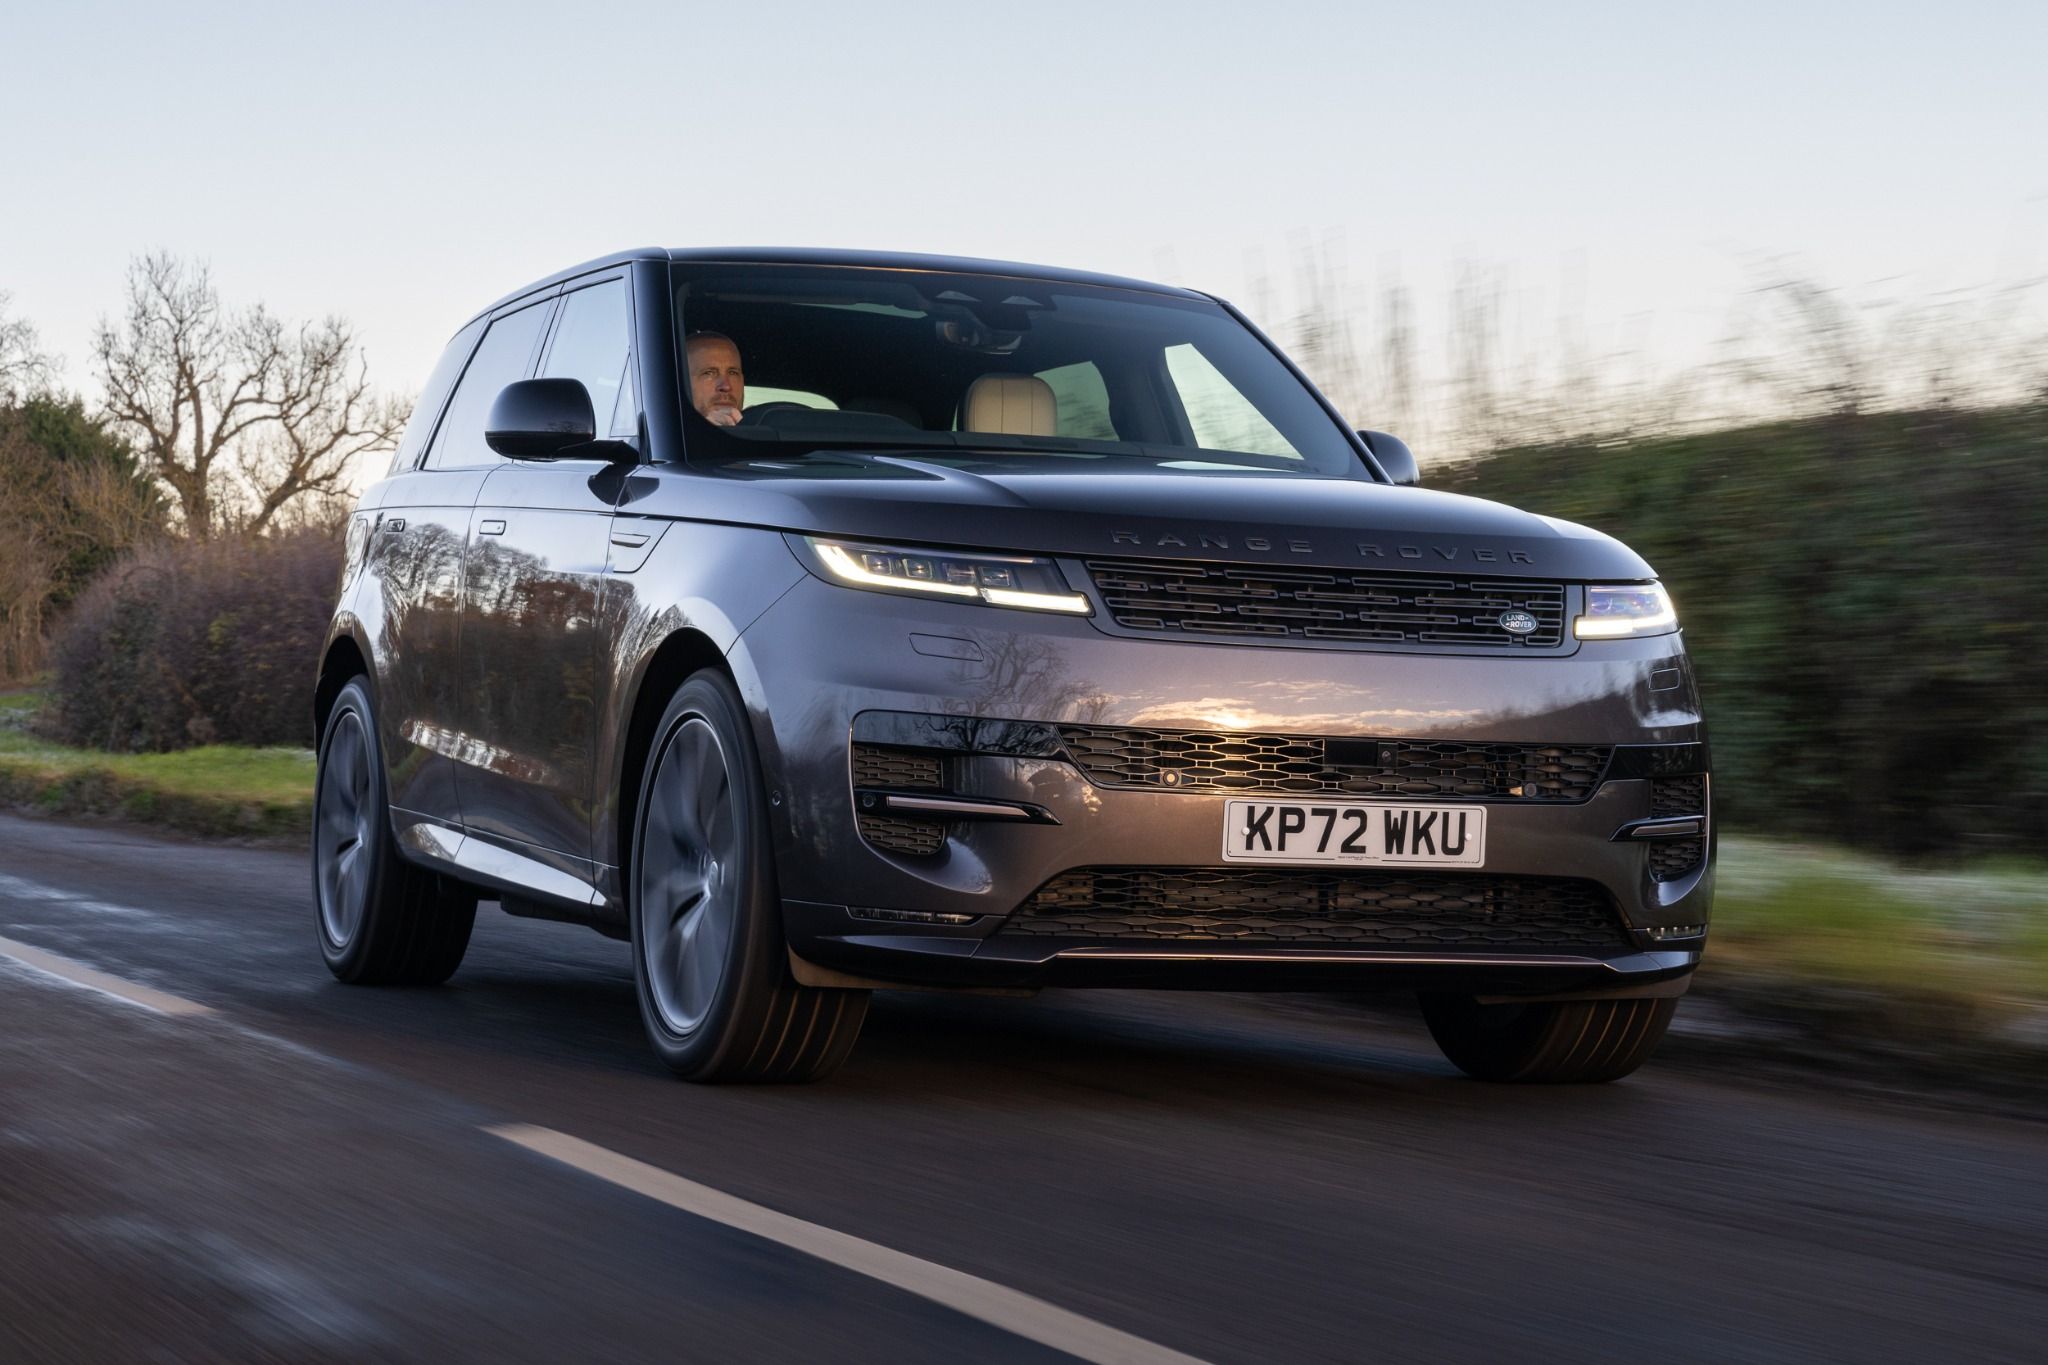 Front view of Range Rover sport driving on a road